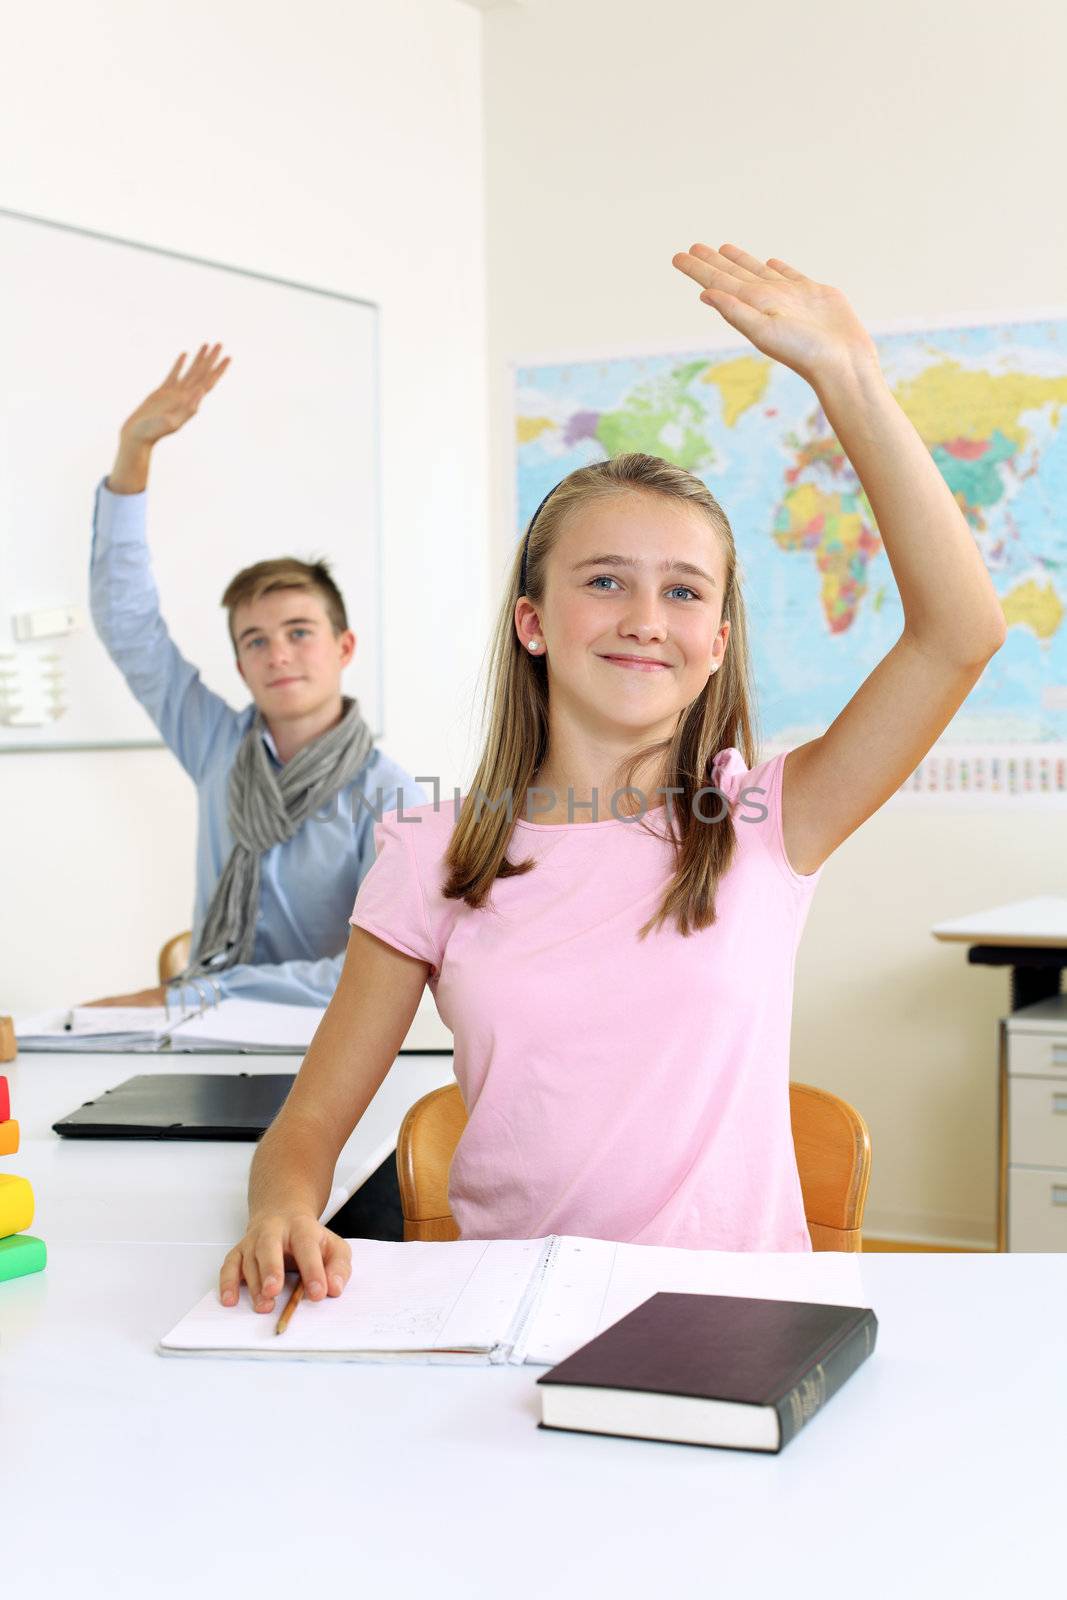 Students raising their hands in class by sumners